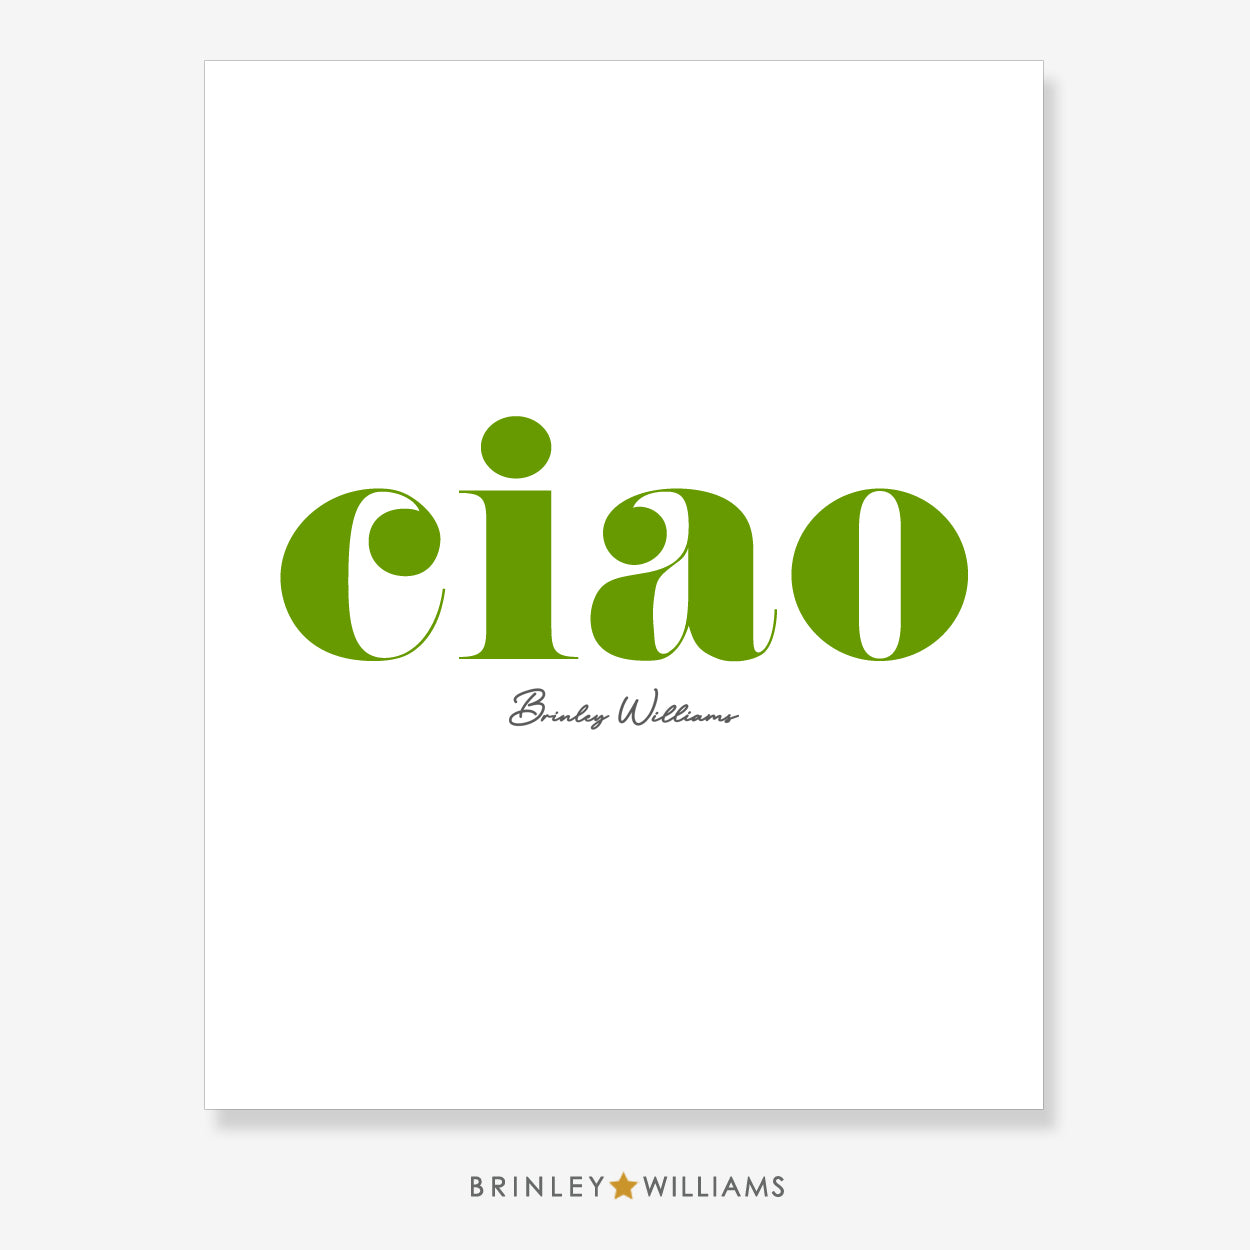 Ciao Wall Art Poster - Green